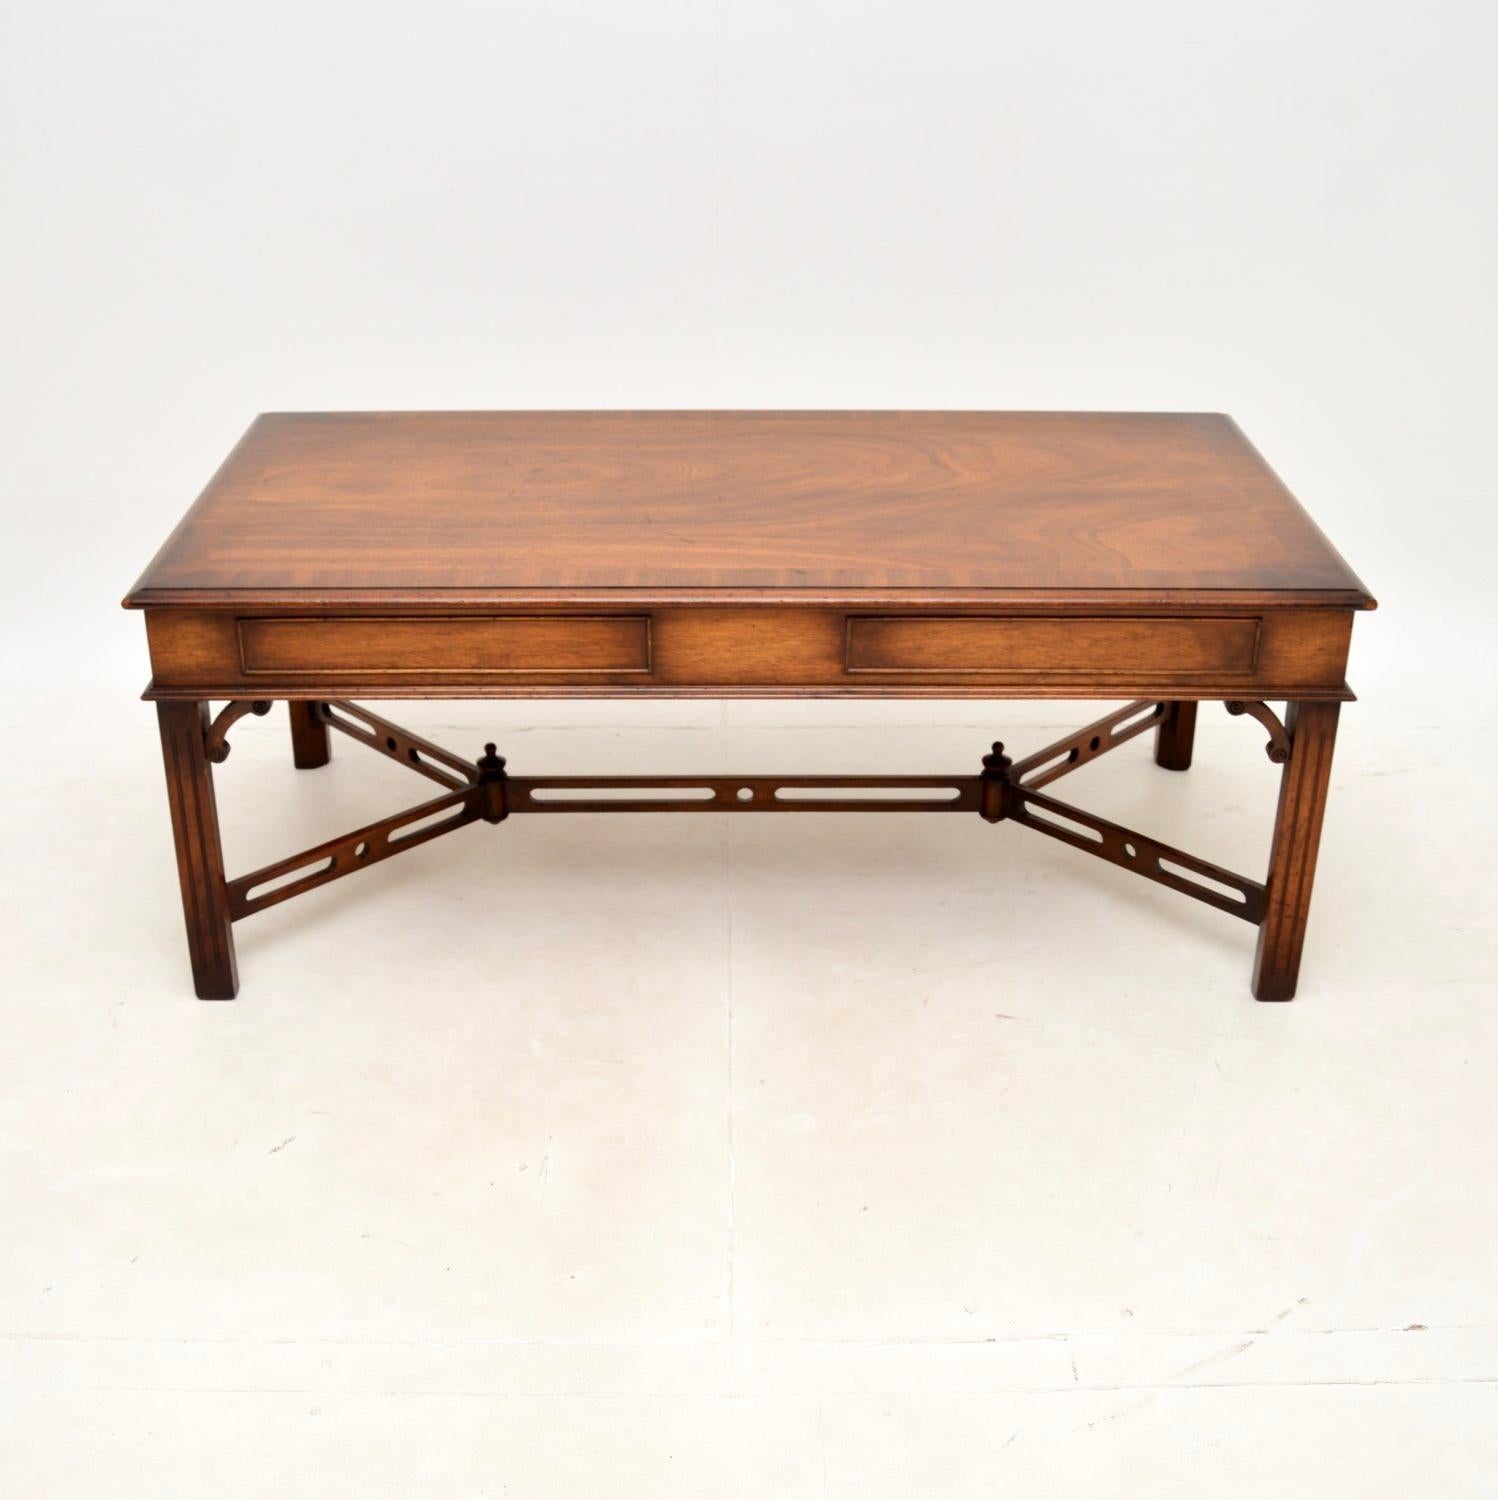 A large and impressive antique Georgian style coffee table. This was made in England, it dates from around the 1950’s.

The quality is superb, this is a great size and has drawers that slide out from either end. It has a large surface area with a